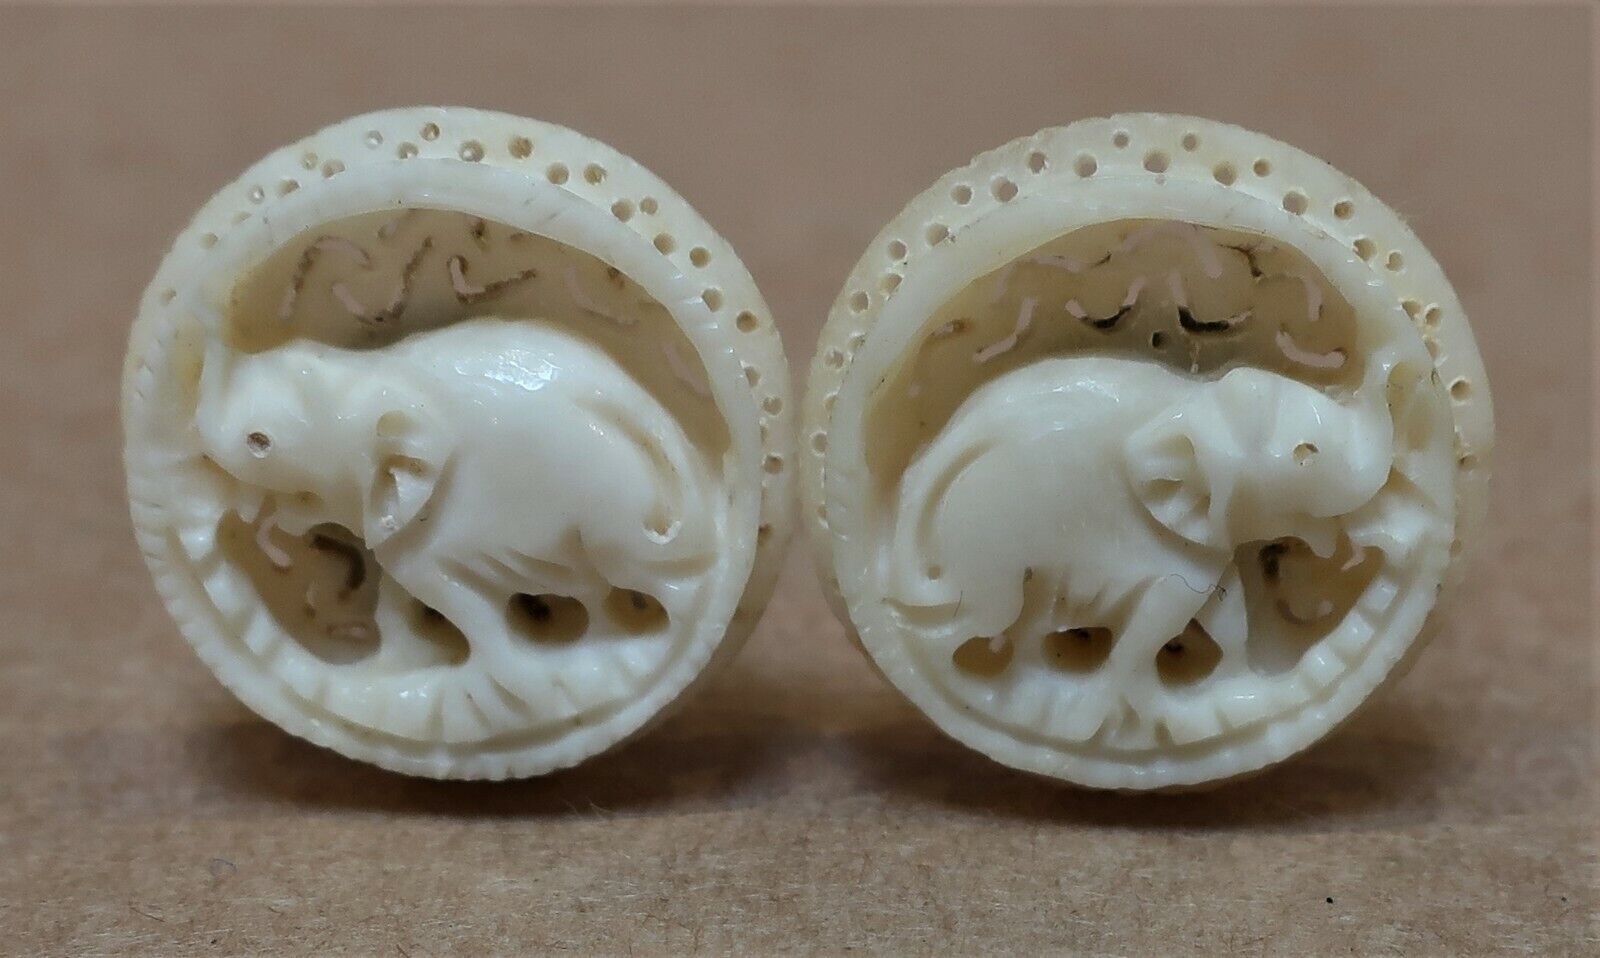 LOVELY VINTAGE CARVED ELEPHANT THEMED CLIP ON EARRINGS